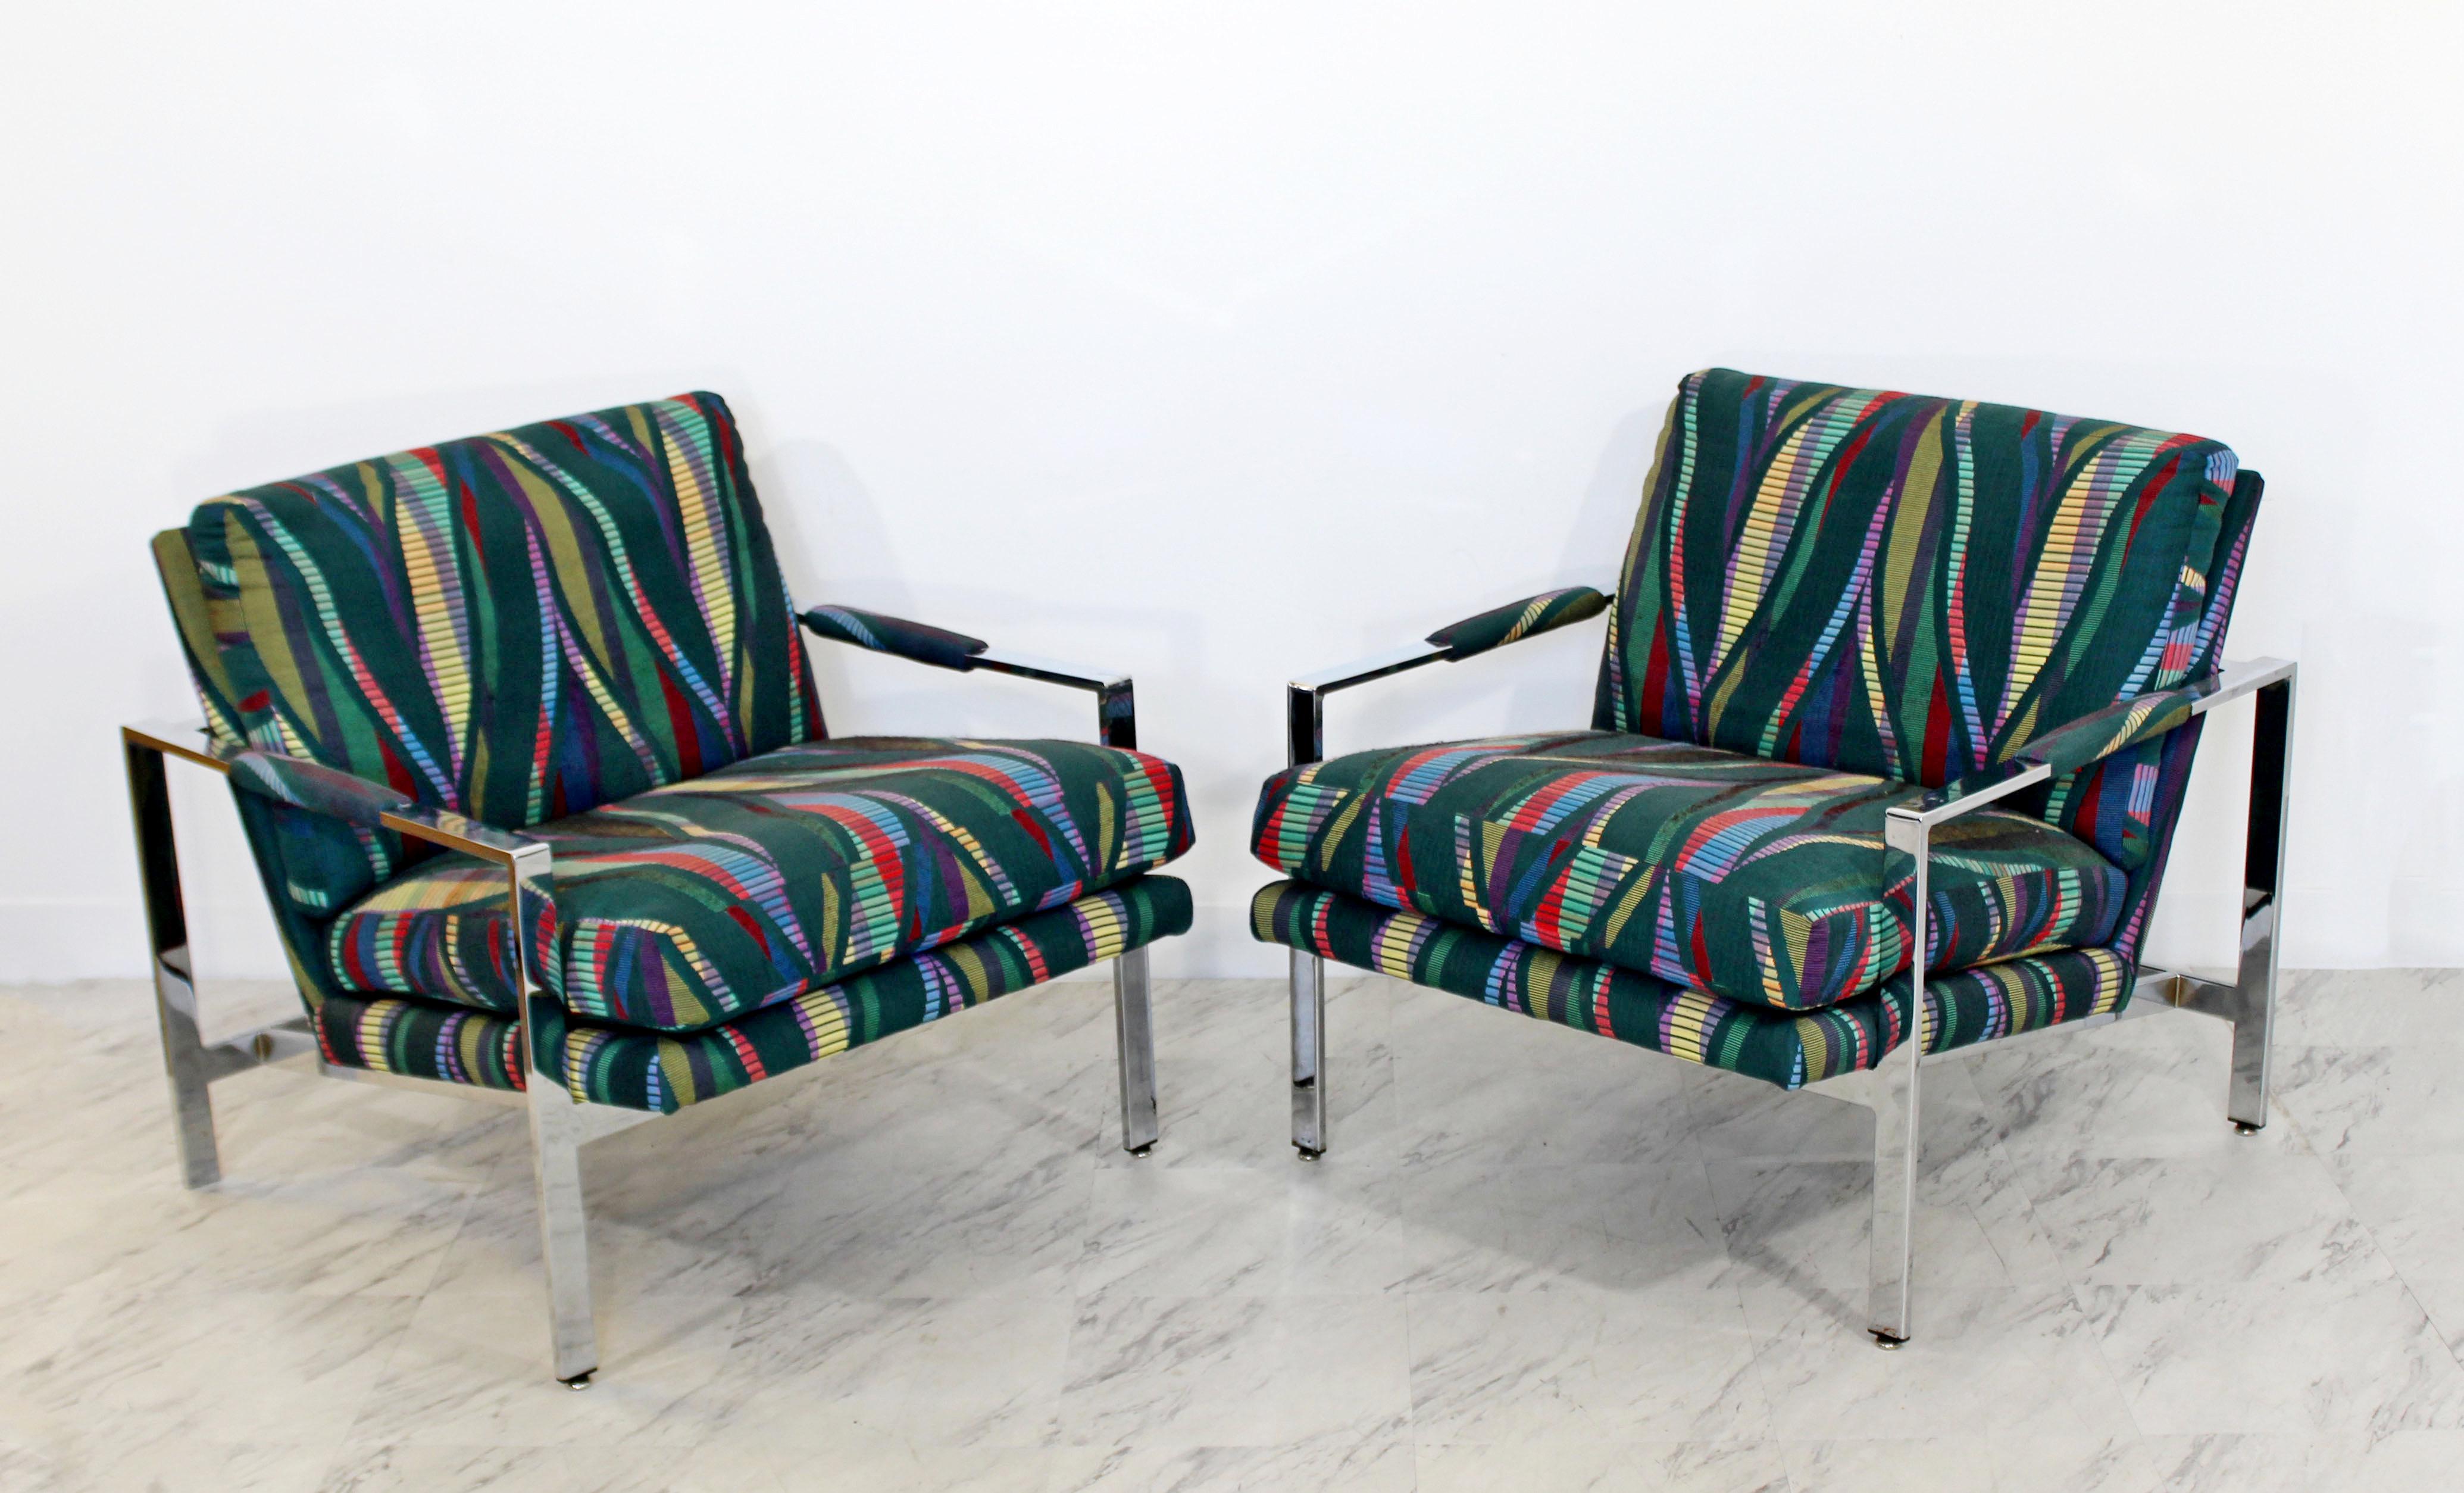 For your consideration is a wonderful pair of chrome cube armchairs, with a fabulous Jack Lenor Larsen style fabric, by Milo Baughman, circa the 1970s. In excellent condition. The dimensions are 28.5